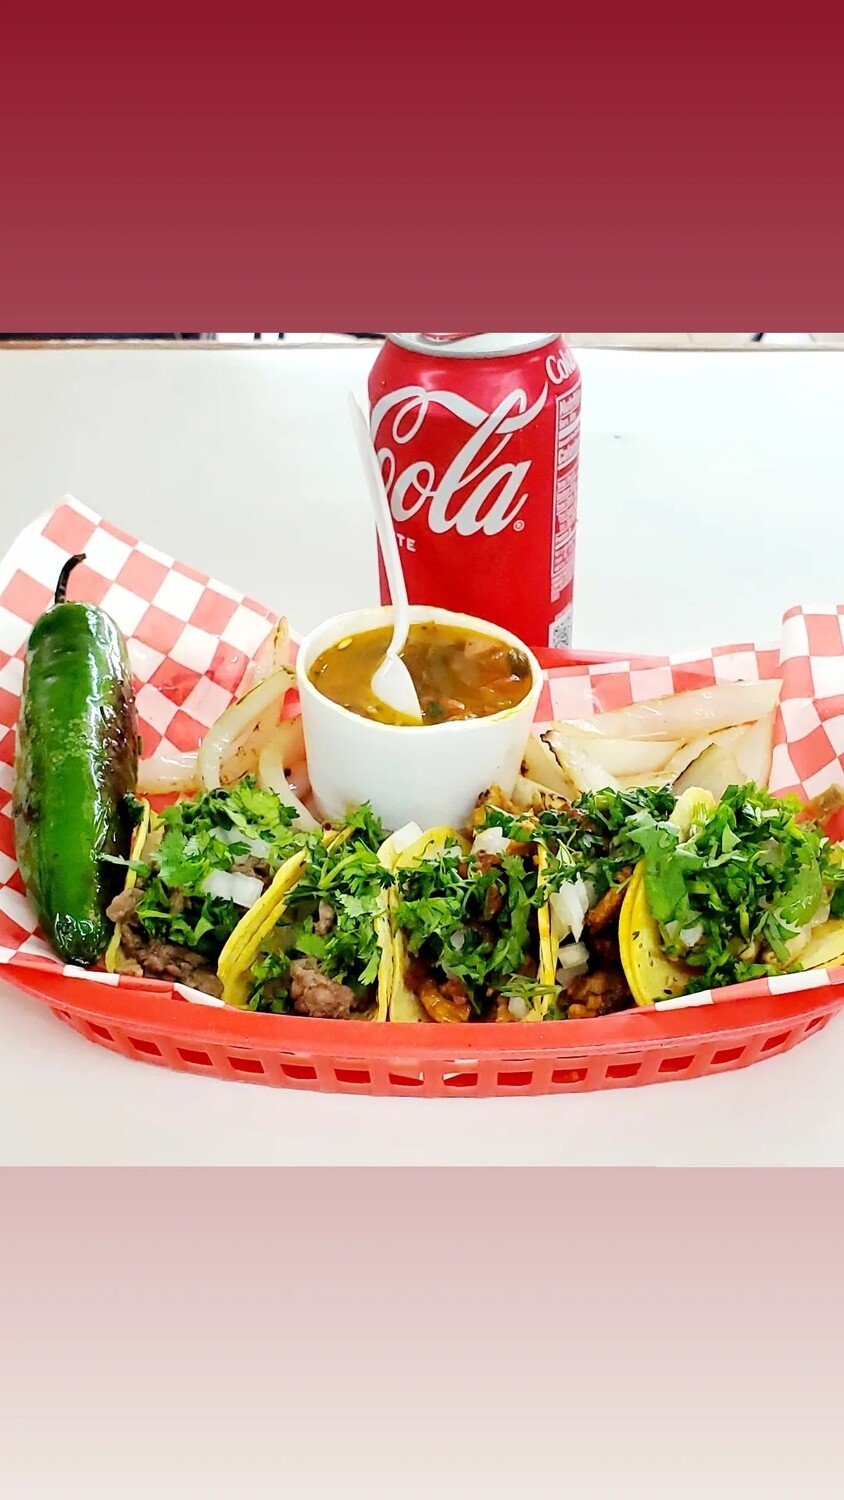 TACO COMBI 12oz DRINK FROM 10:00 AM TO 2:00PM